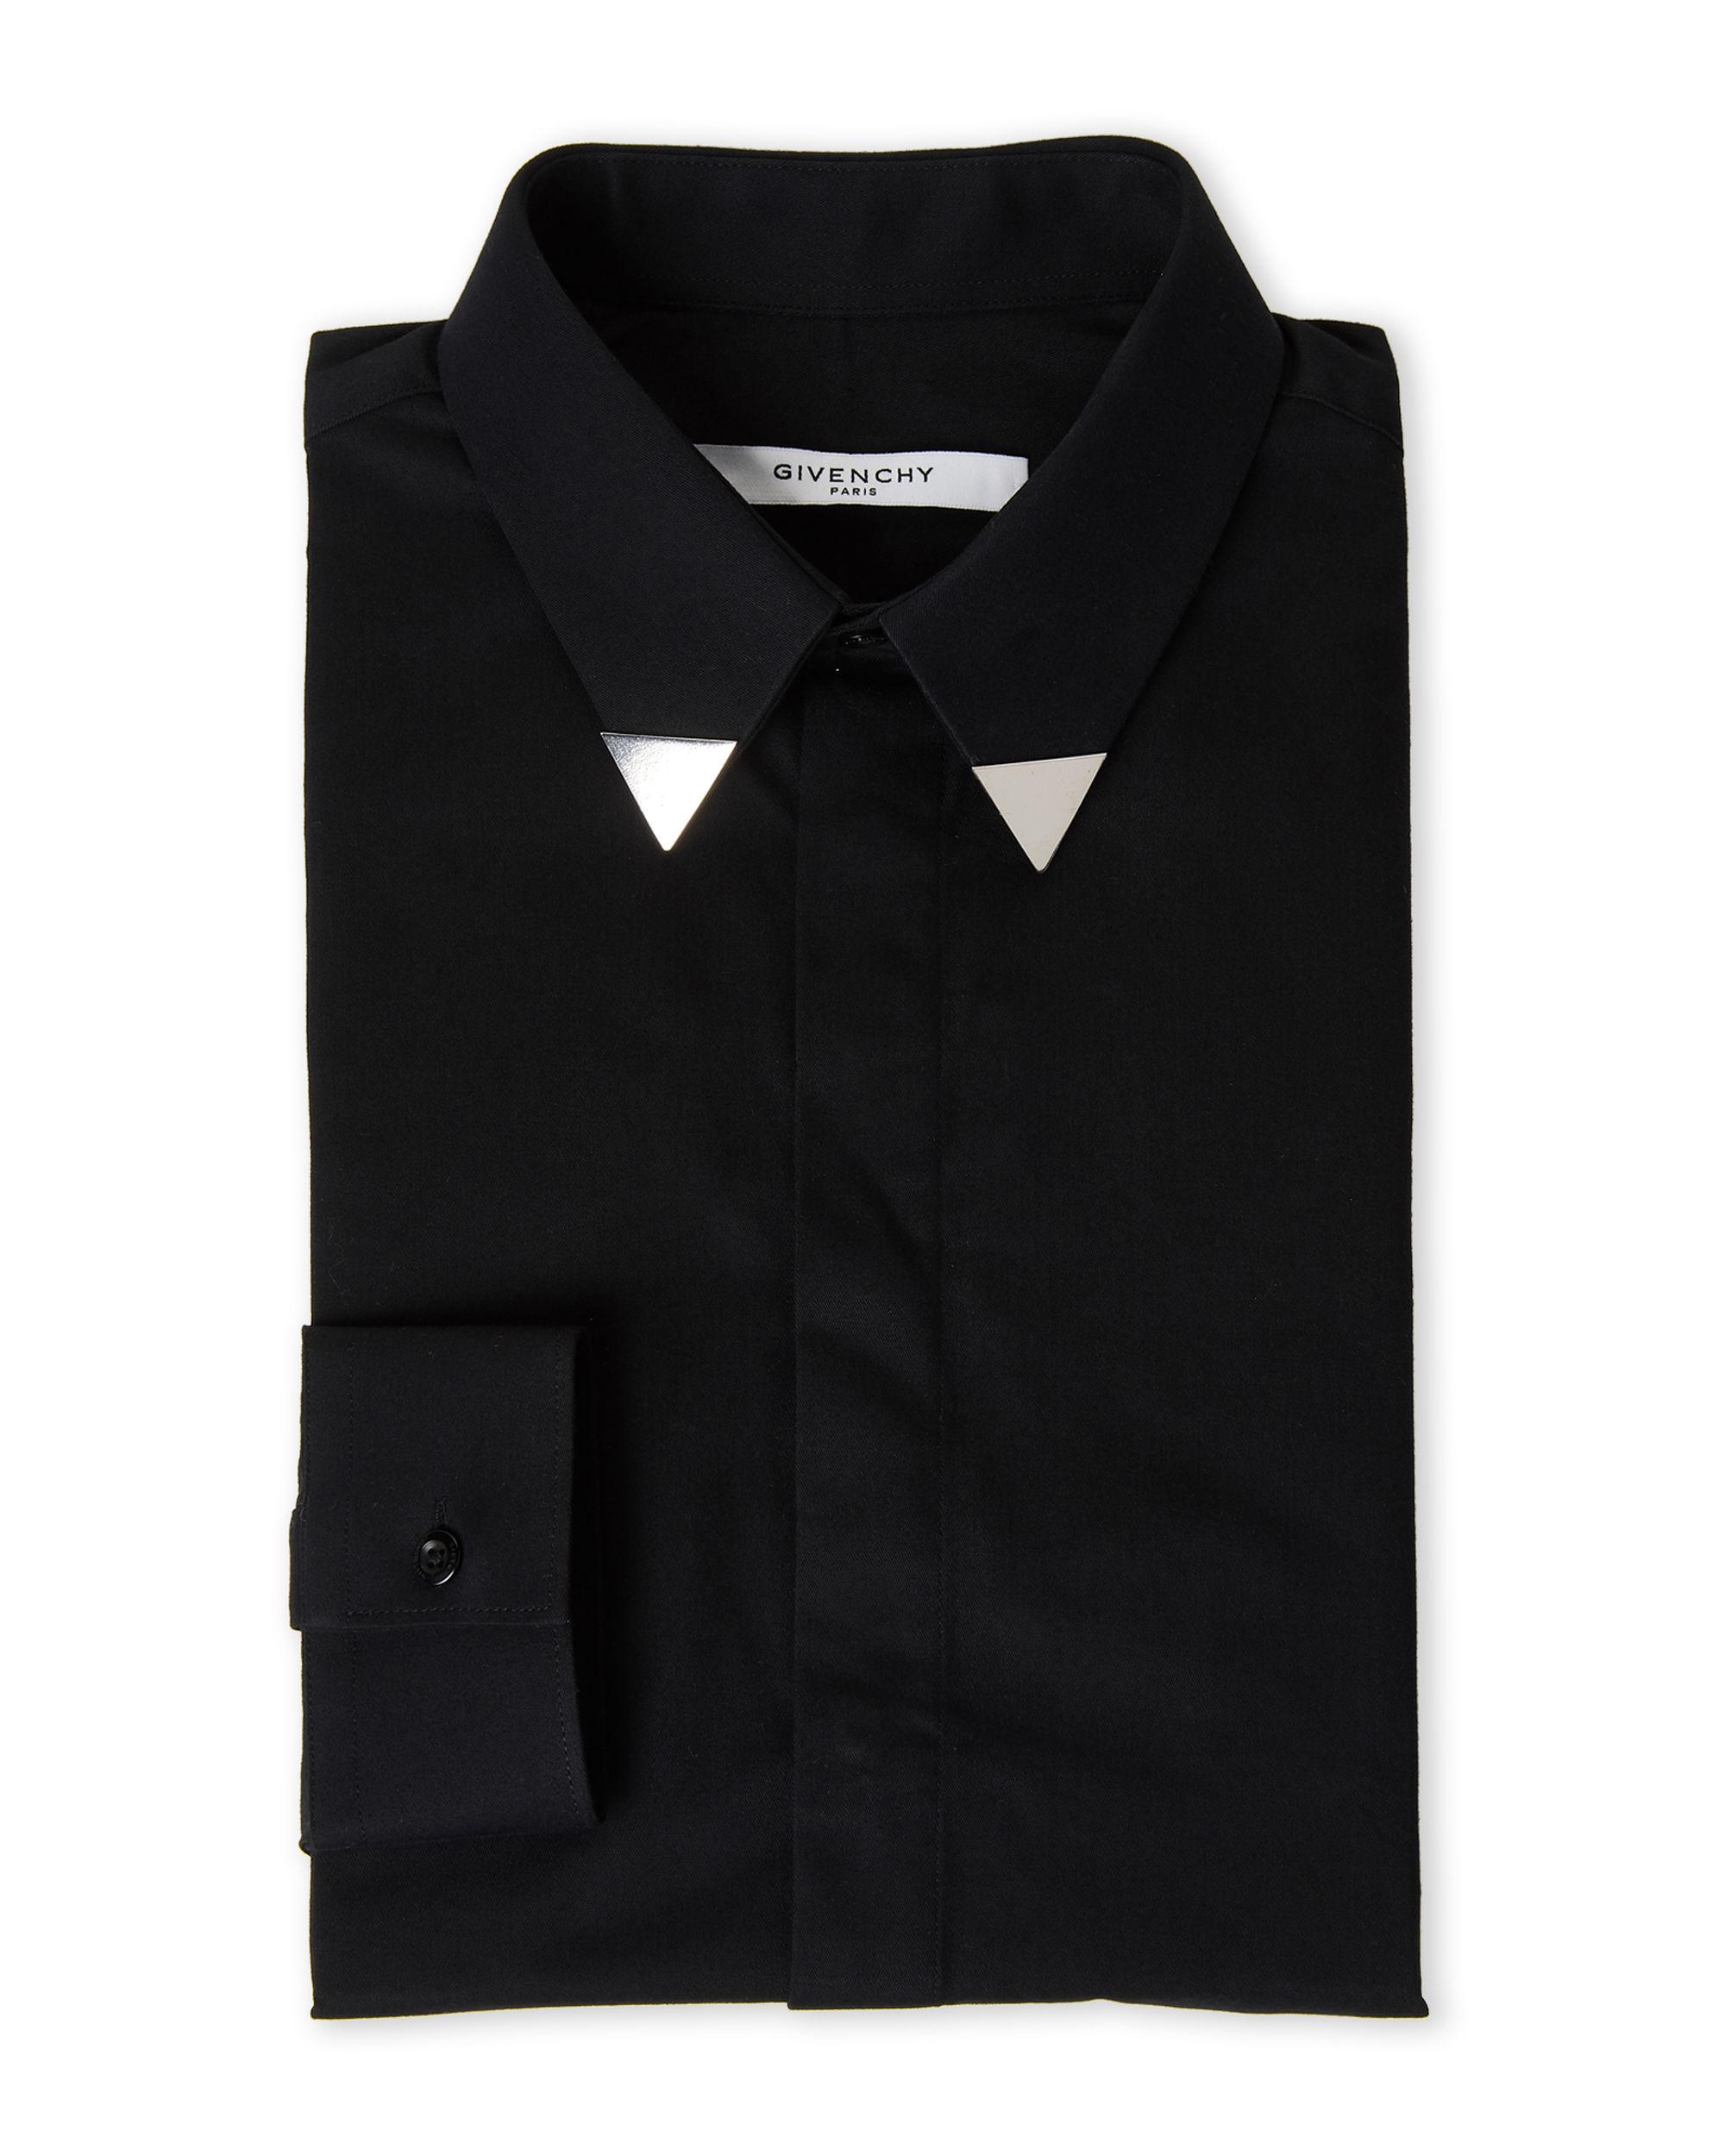 Givenchy Black & Silver-tone Dress Shirt in Black for Men - Lyst